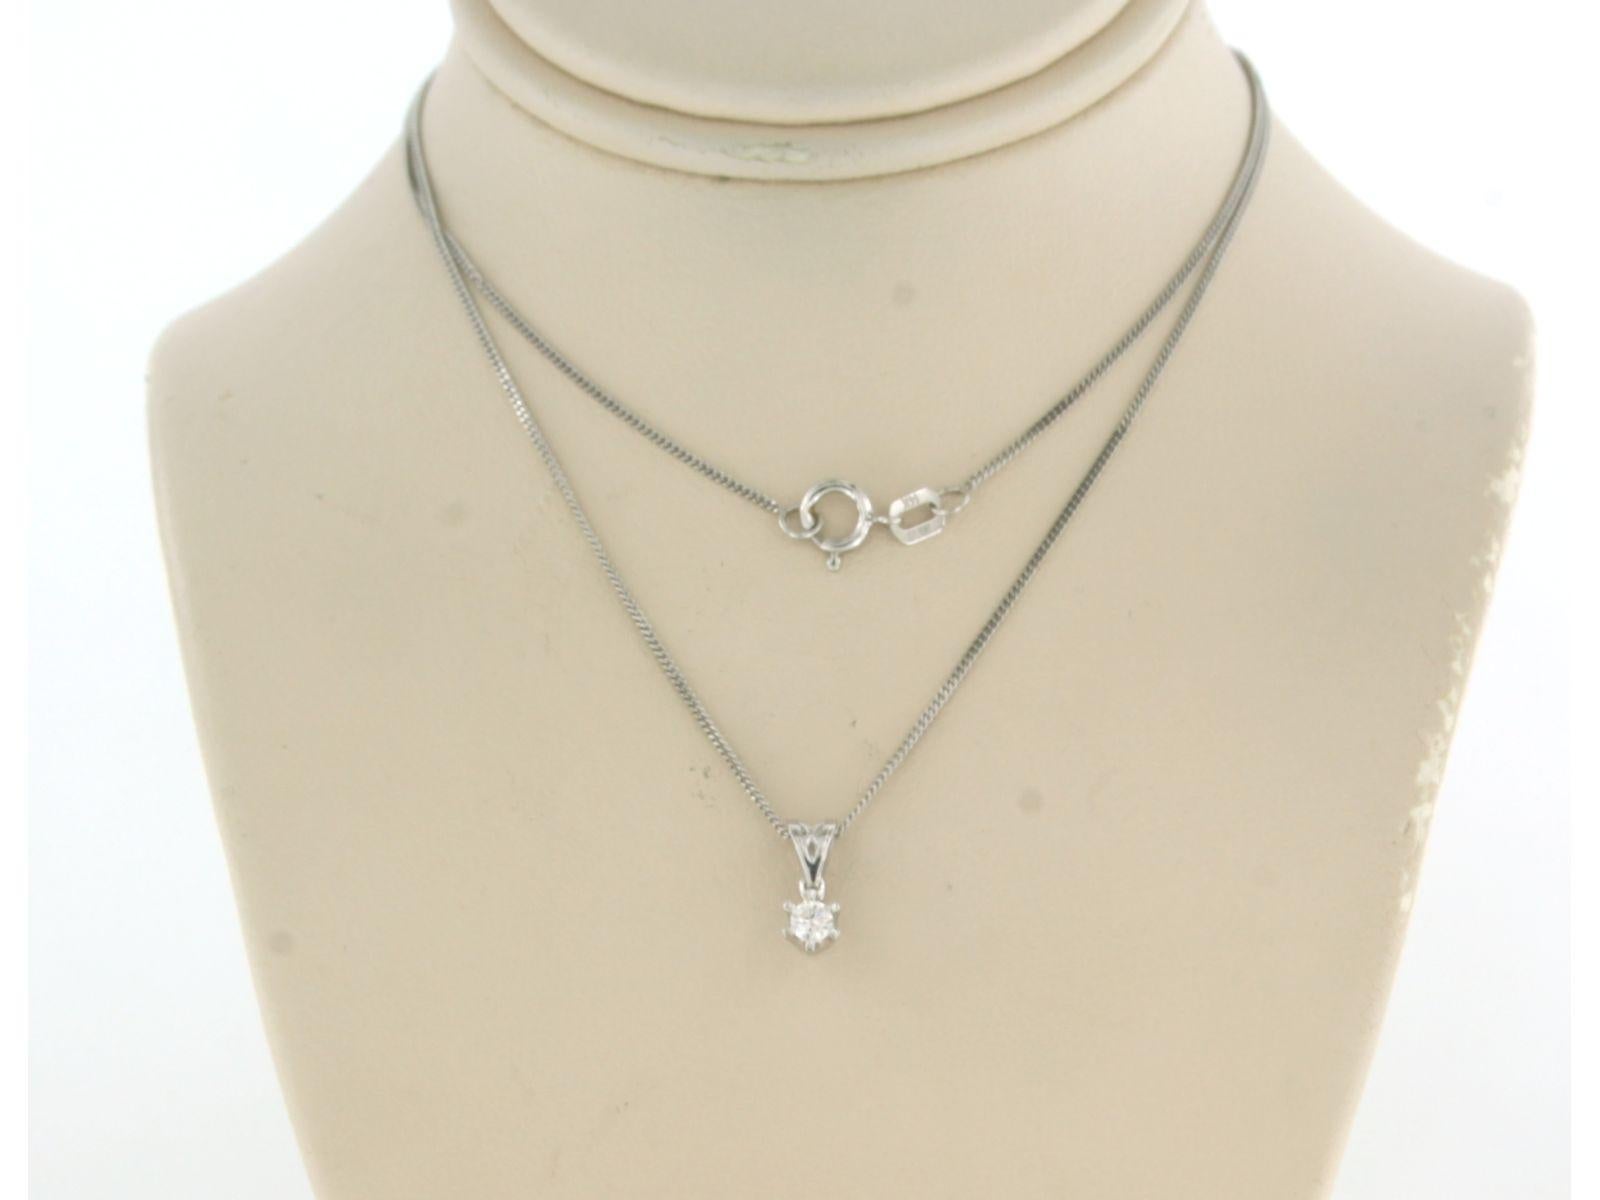 14k white gold necklace with a solitaire pendant set with brilliant cut diamonds up to. 0.09ct - F/G - VS/SI - 45 cm long

detailed description:

necklace is 45 cm long and 0.7 mm wide

size of the pendant is approximately 1.0 cm long by 3.9 mm